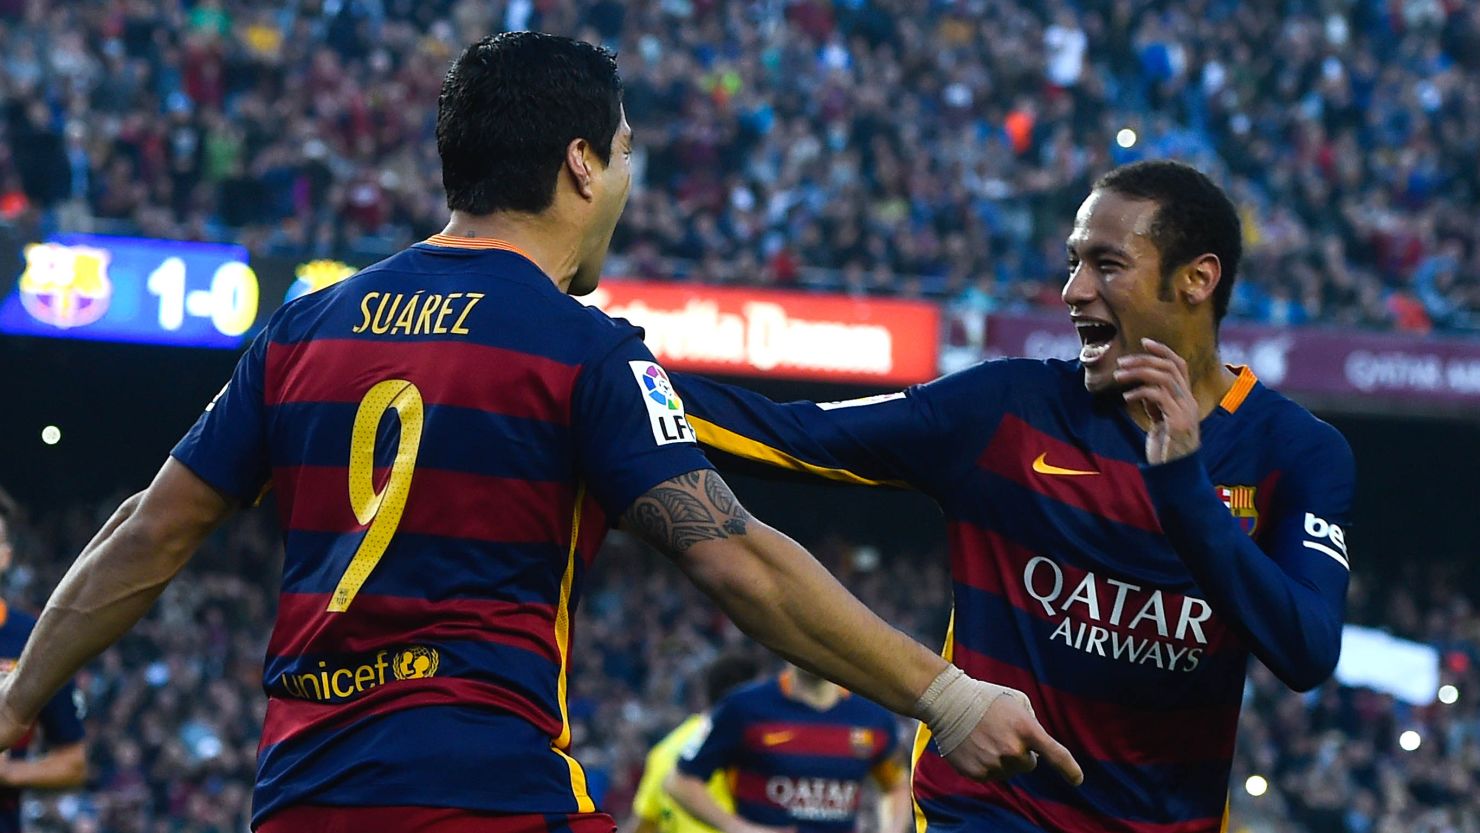 Luis Suarez celebrates with his teammate Neymar as the pair shared Barcelona's goals in the 3-0 win over Villarreal.